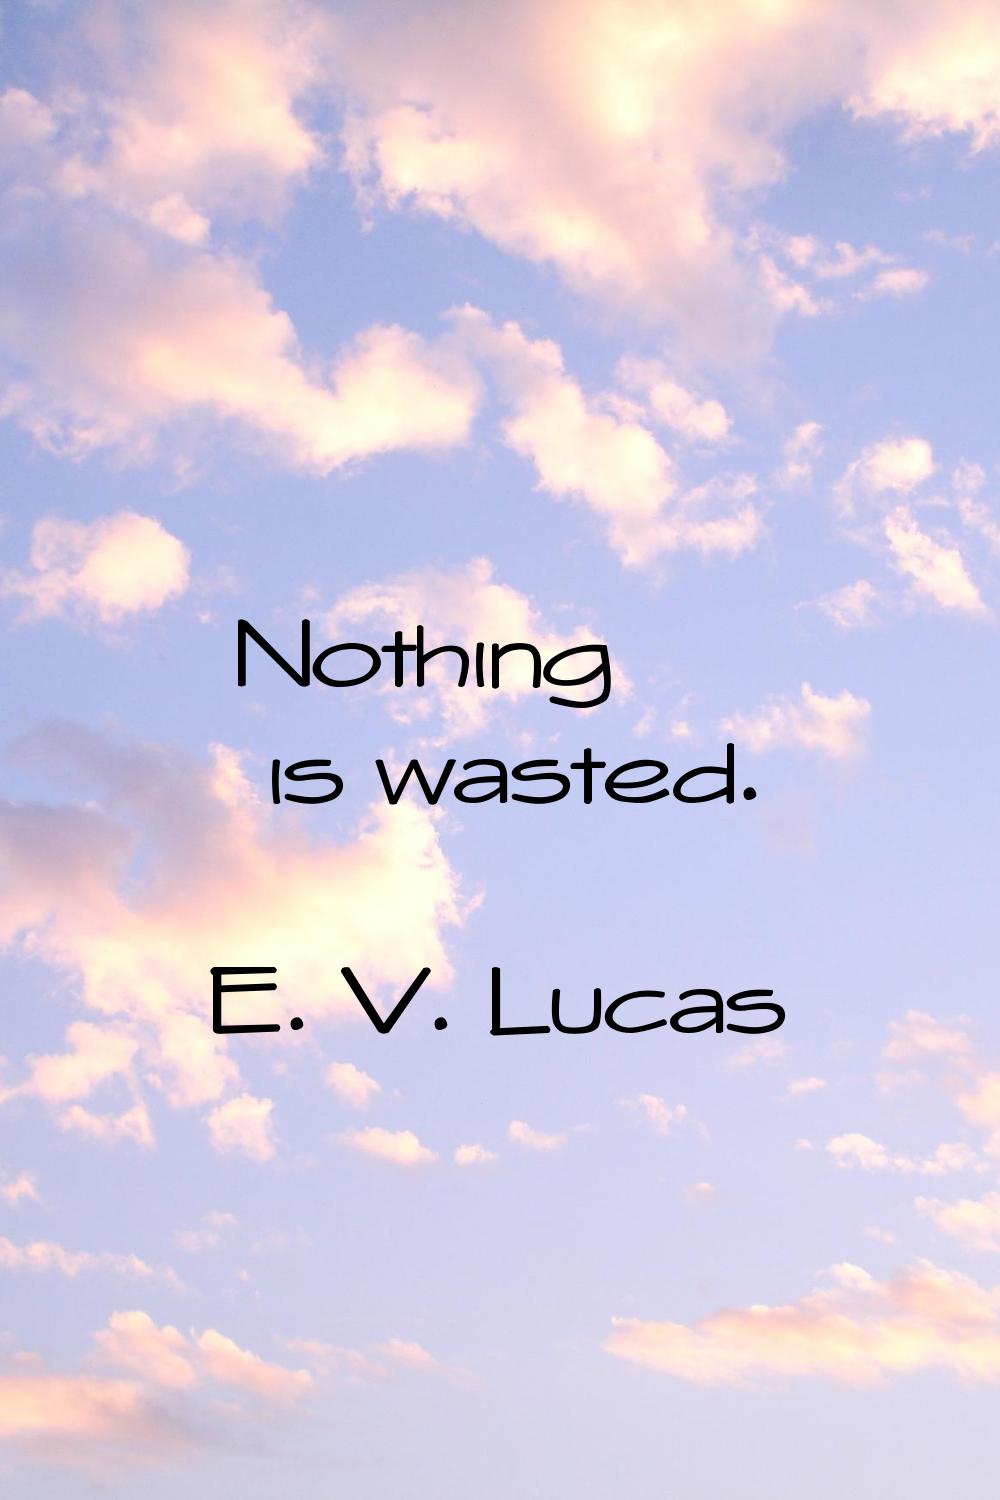 Nothing is wasted.